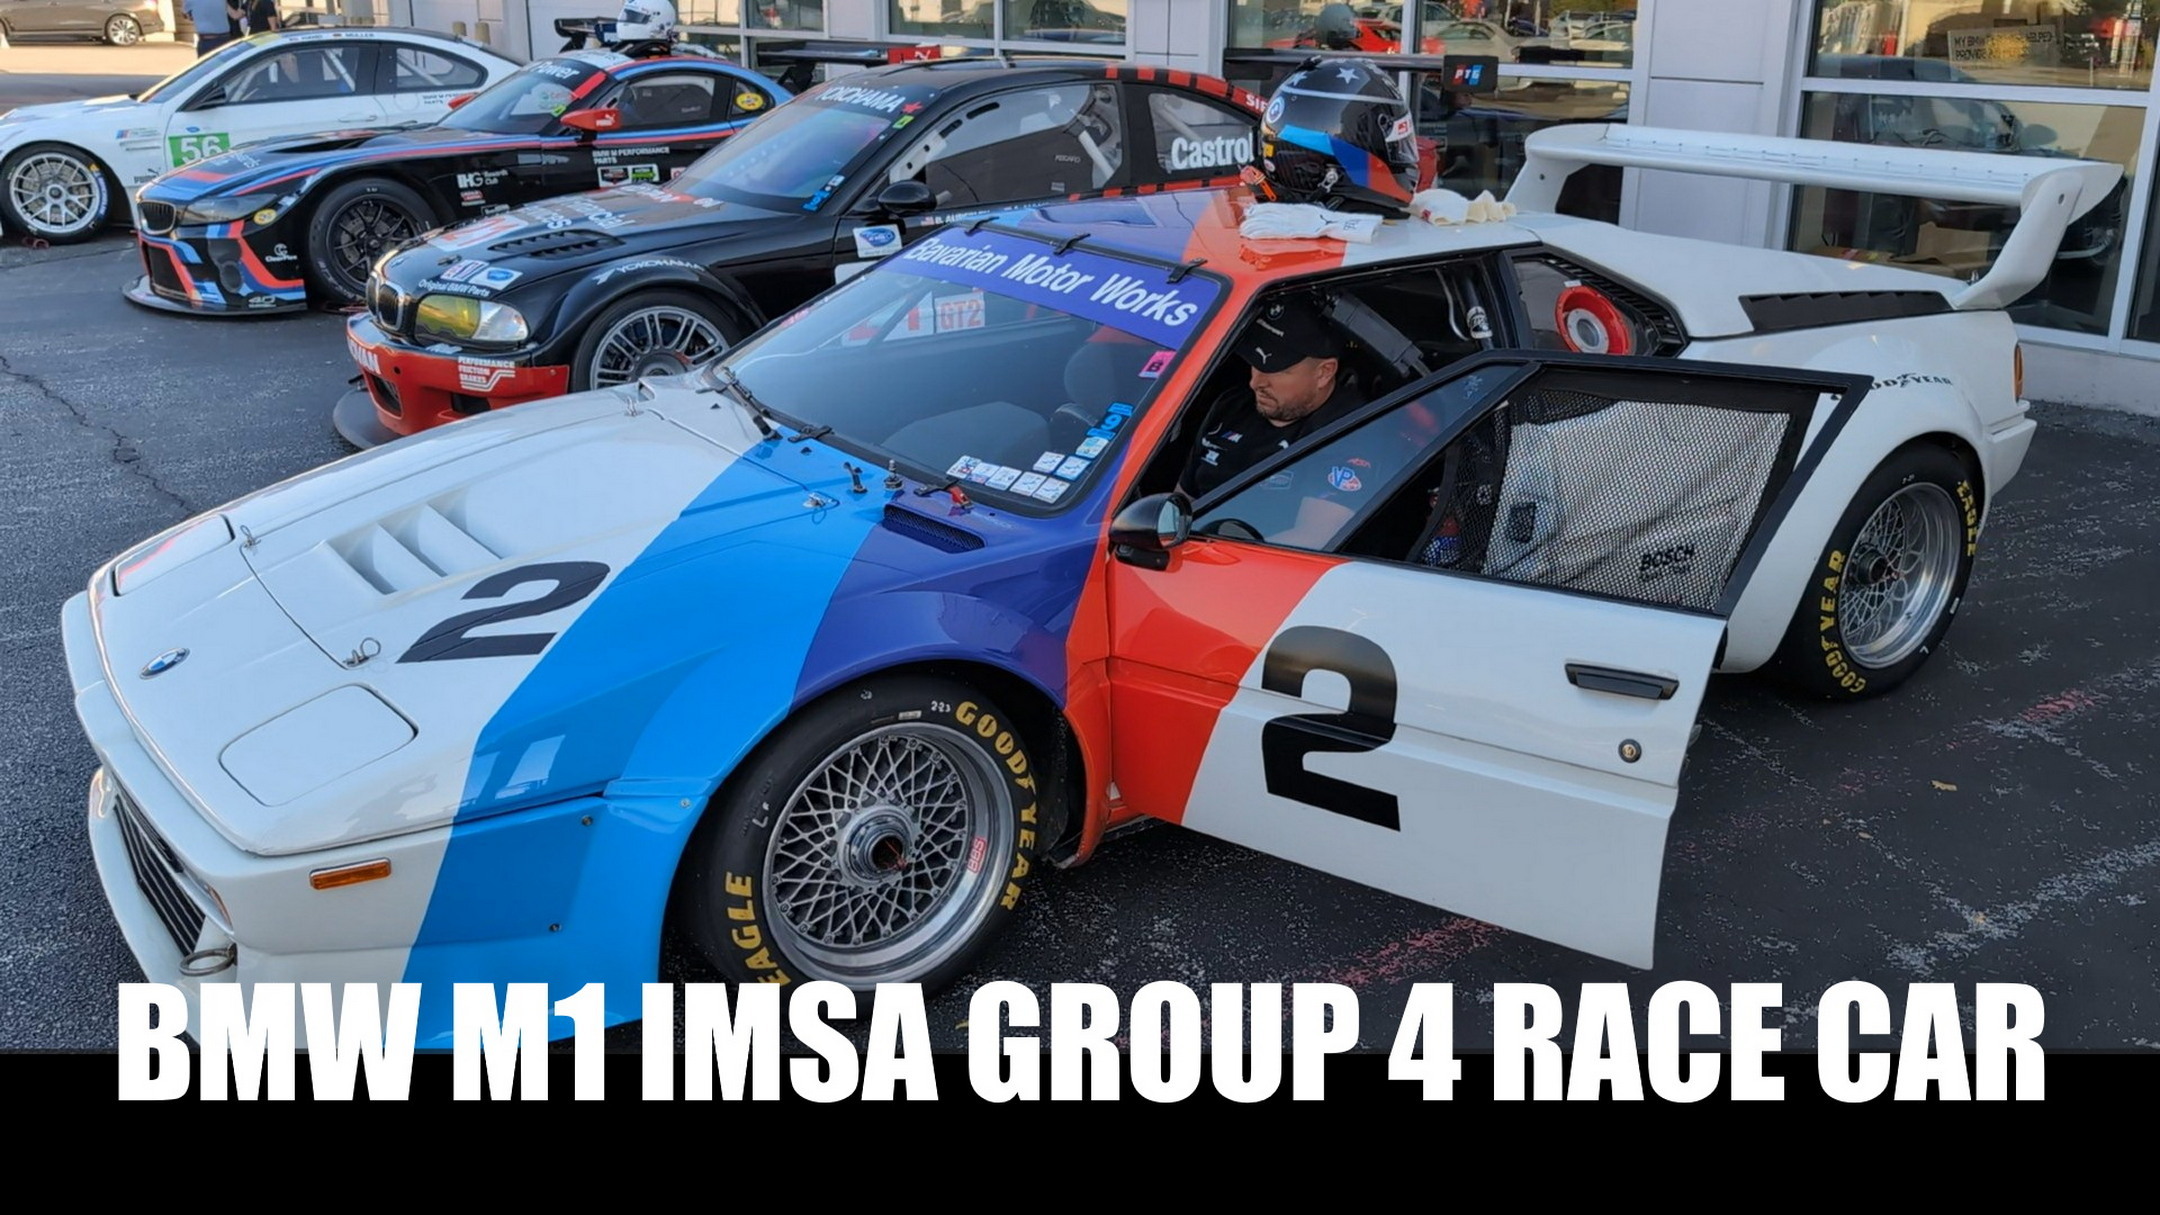 We Ride Along In A Classic 1981 BMW M1 IMSA Group 4 Race Car Auto Recent